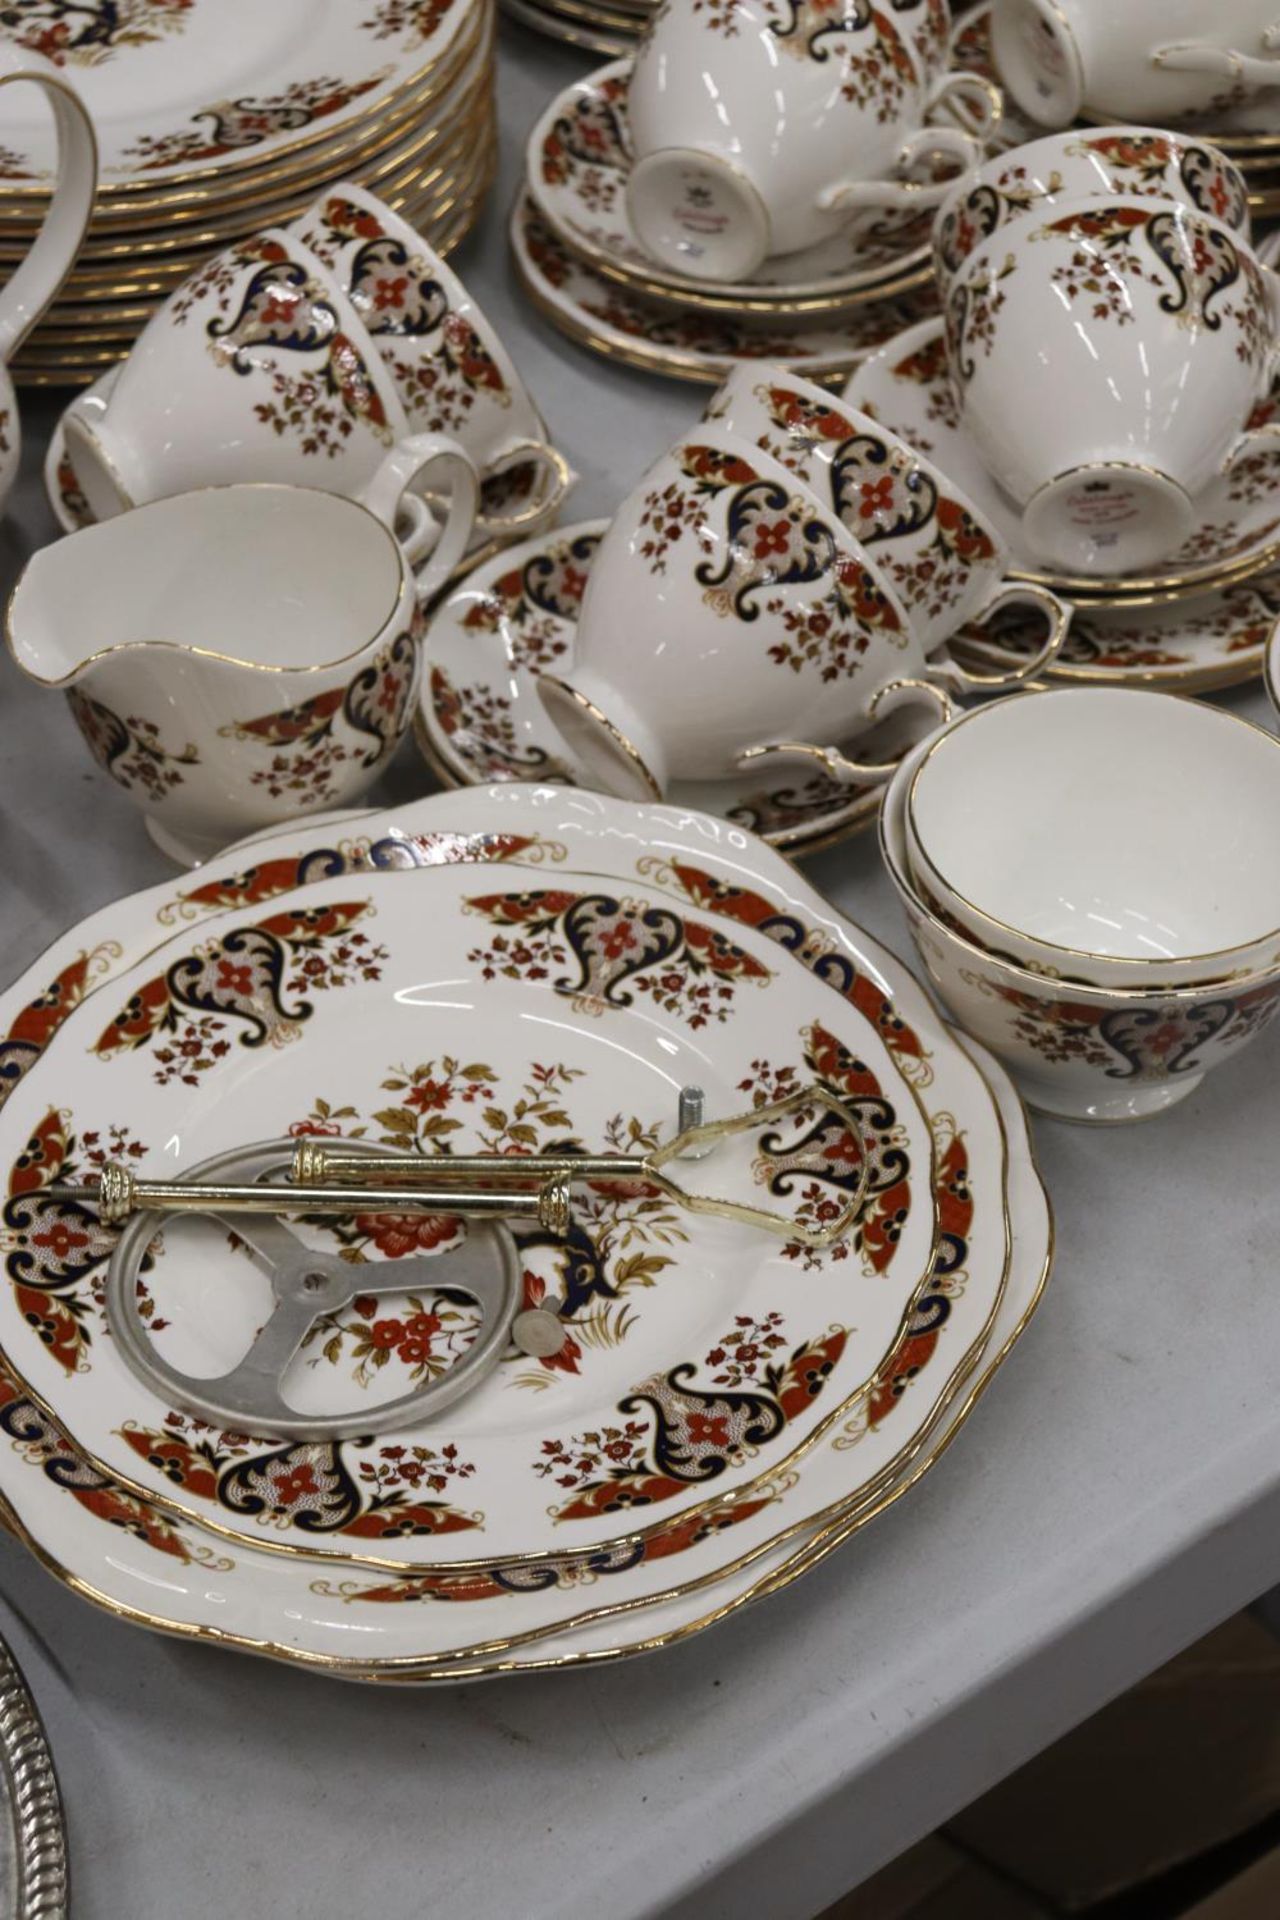 A COLCLOUGH "ROYALE" PART DINNER SERVICE TO INCLUDE A TEAPOT, TEACUPS, PLATES, DISHES, ETC., - Image 8 of 8